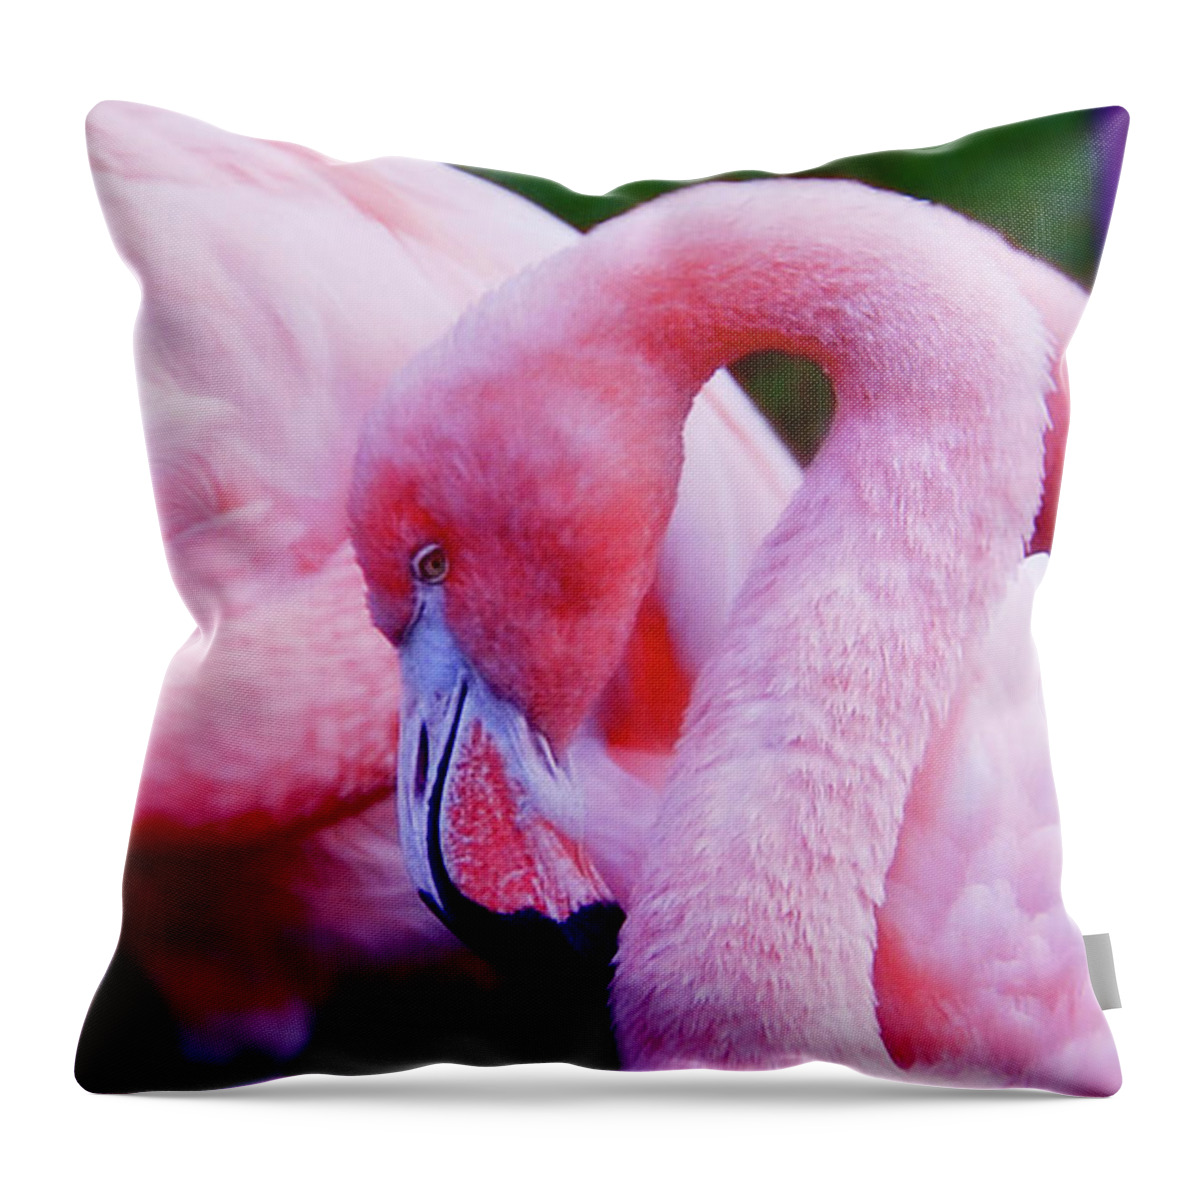 Bird Throw Pillow featuring the photograph Bubble Gum Pink by Elaine Manley